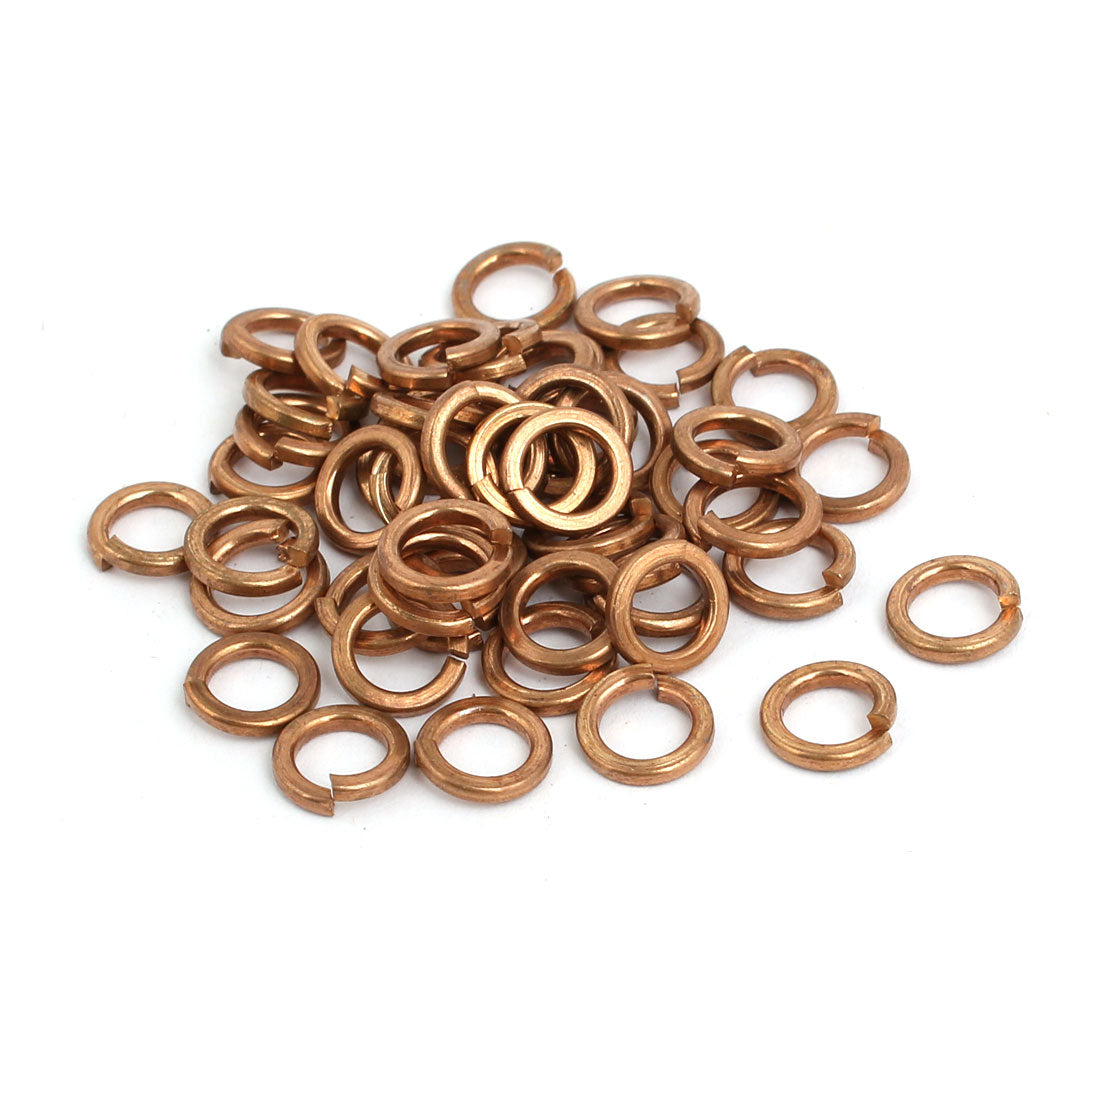 uxcell Uxcell 50pcs 5mm Inner Dia Brass Split Lock Spring Washer Ring Gasket Copper Tone